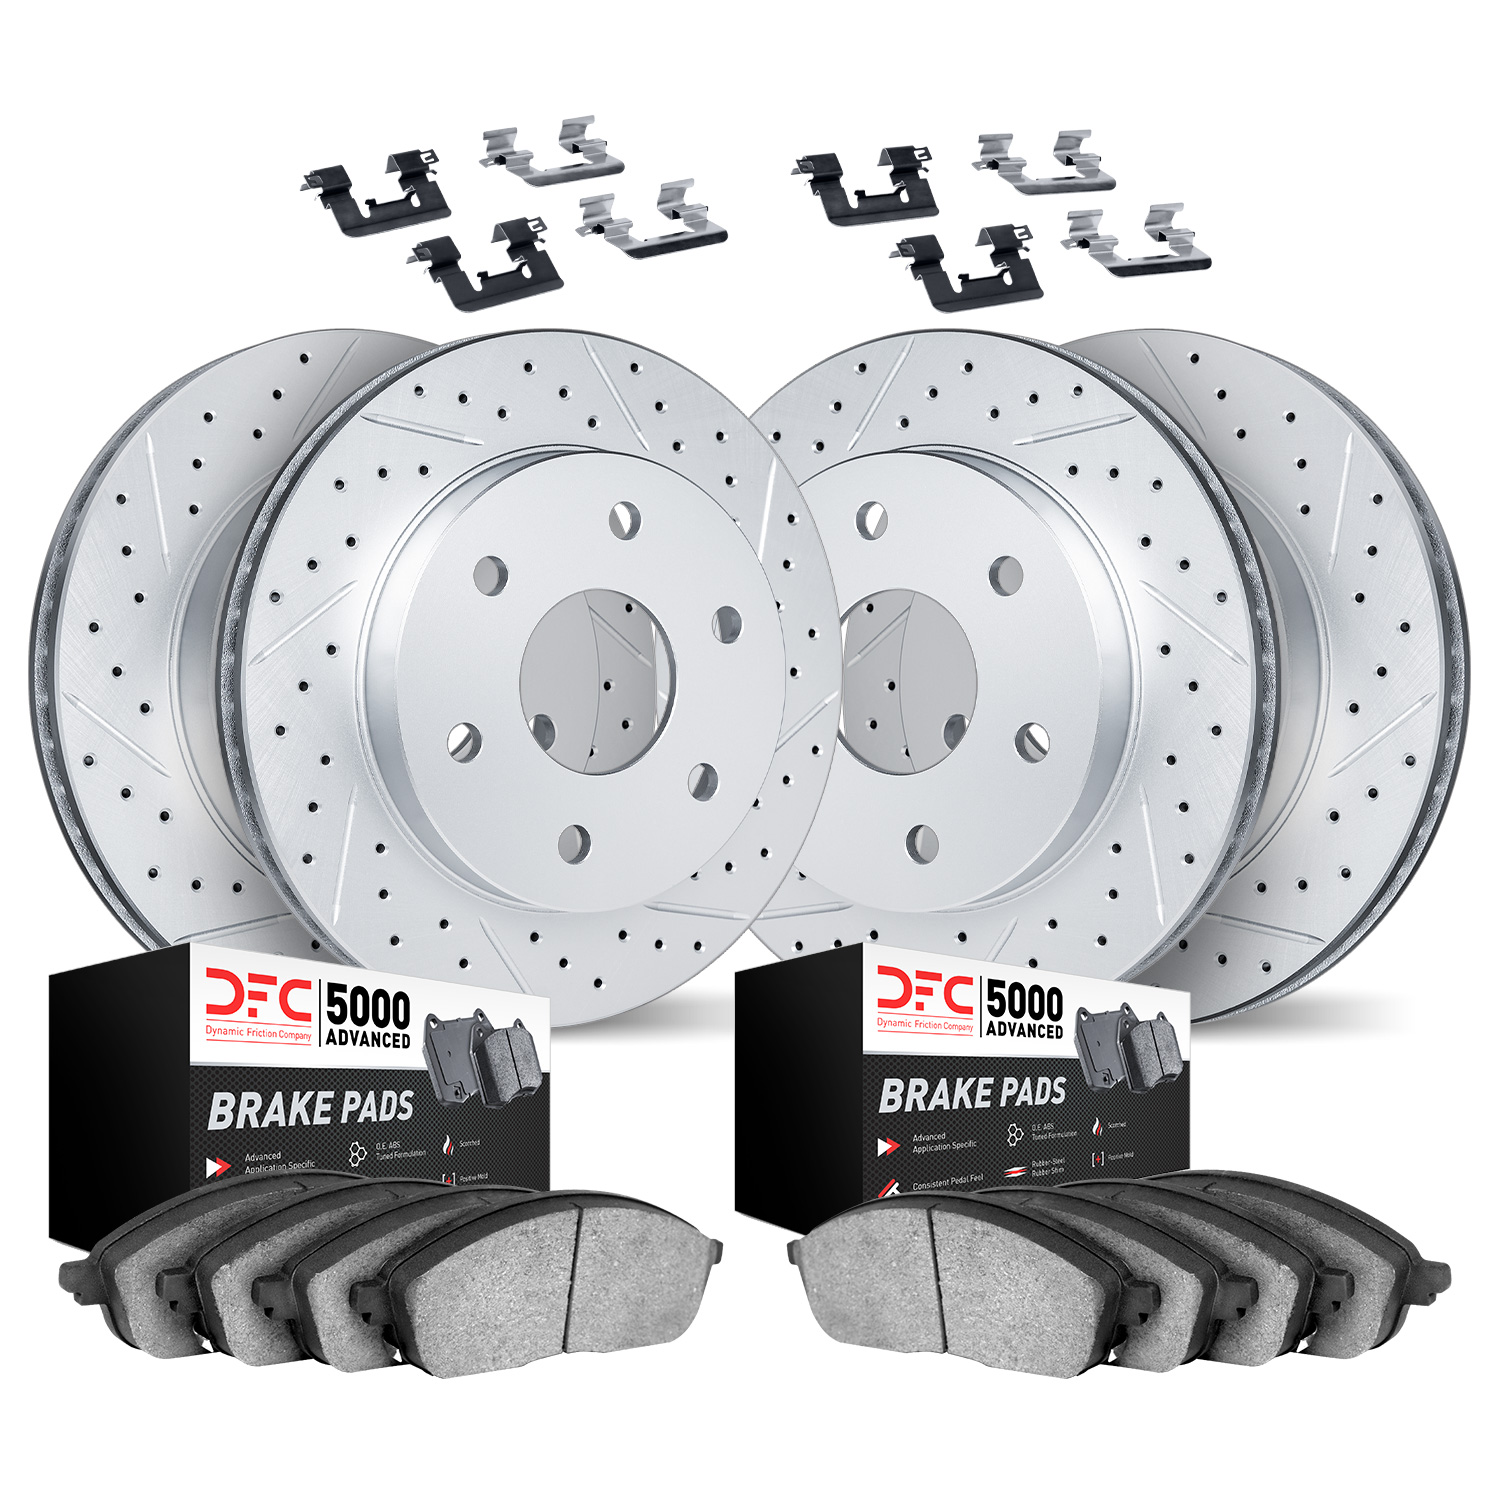 2514-48030 Geoperformance Drilled/Slotted Rotors w/5000 Advanced Brake Pads Kit & Hardware, 2007-2008 GM, Position: Front and Re